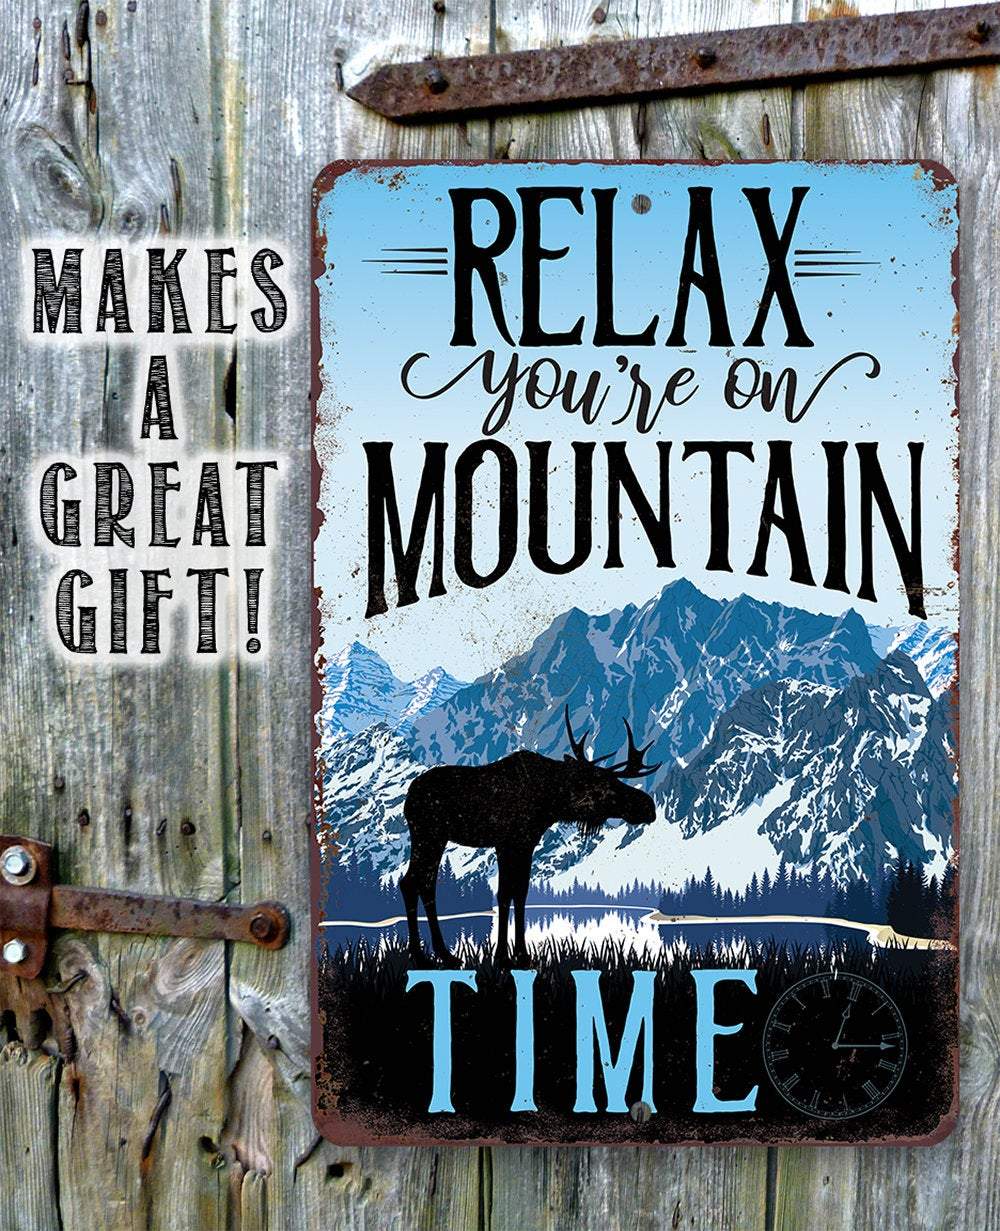 Relax You're On Mountain Time - Metal Sign | Lone Star Art.